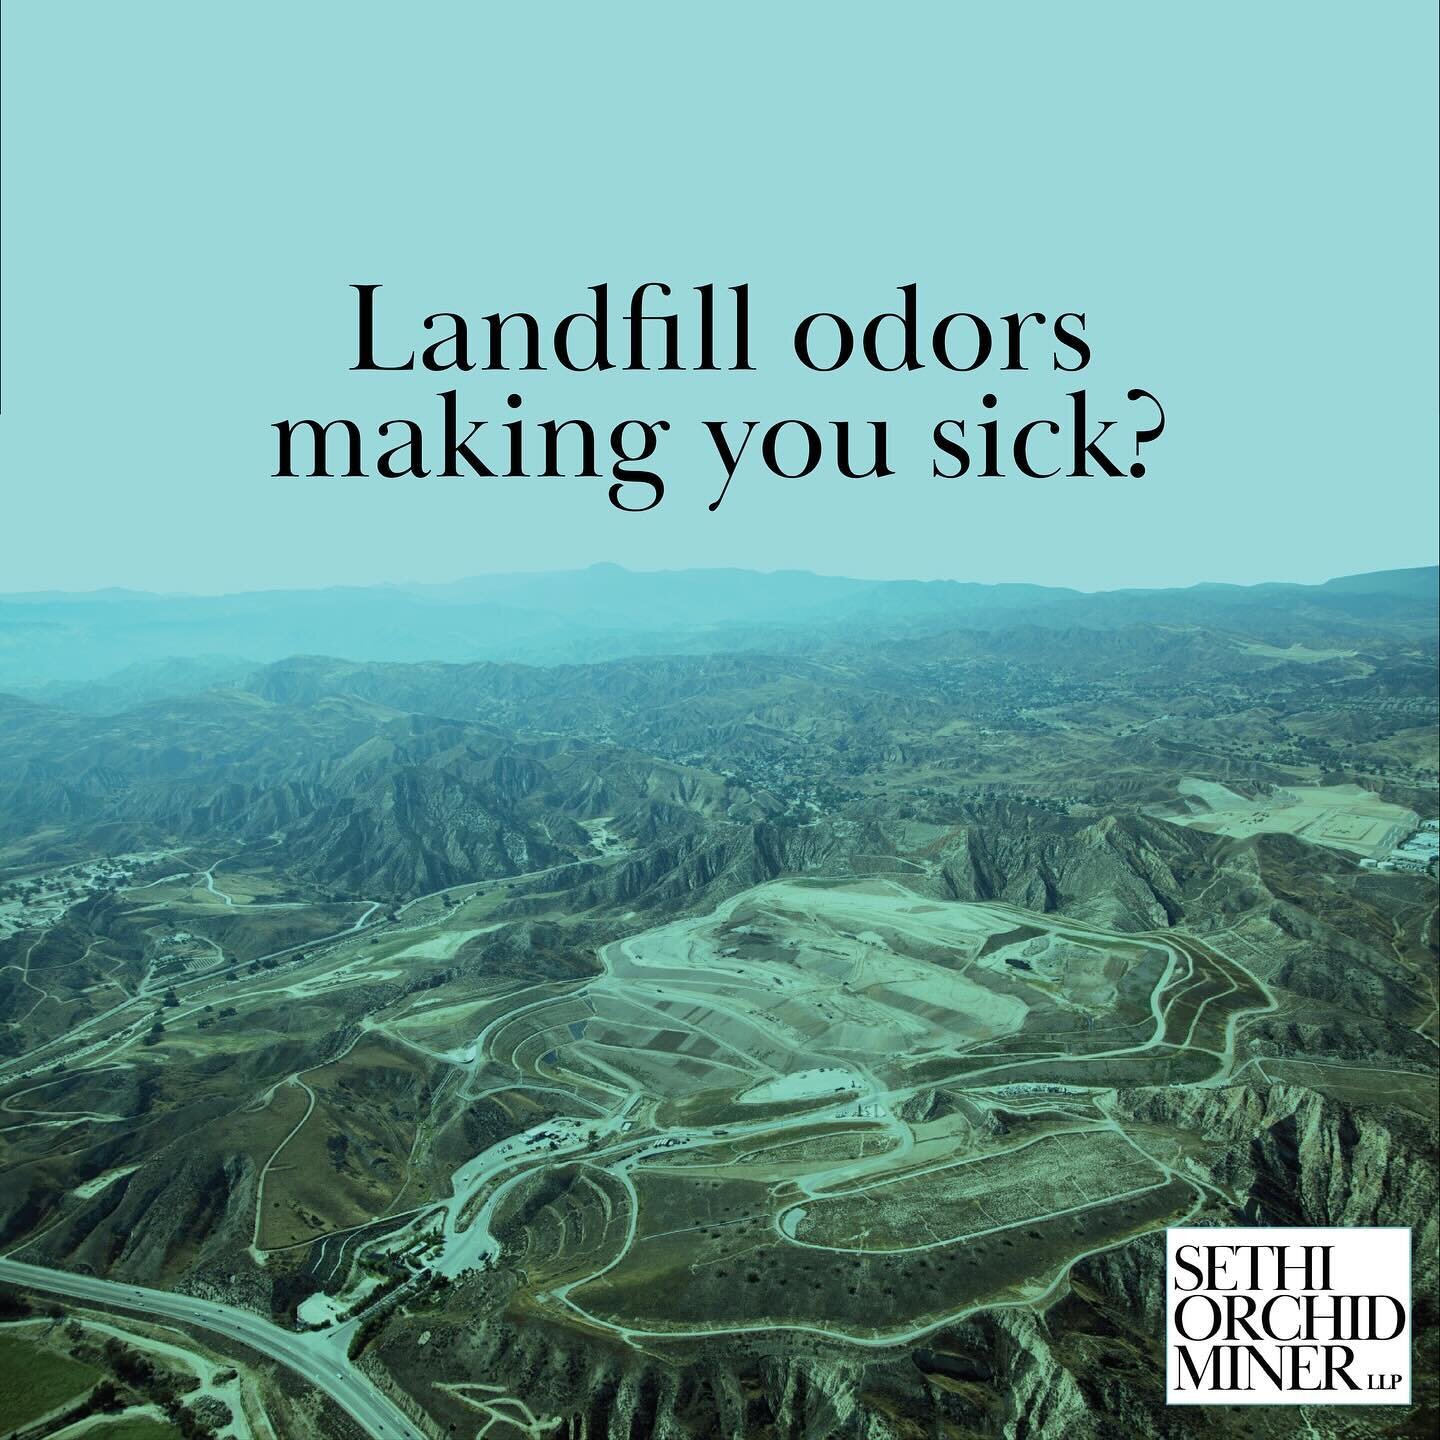 Join hundreds of your neighbors in the first and only active lawsuit seeking to shut the Landfill down and get you compensation.